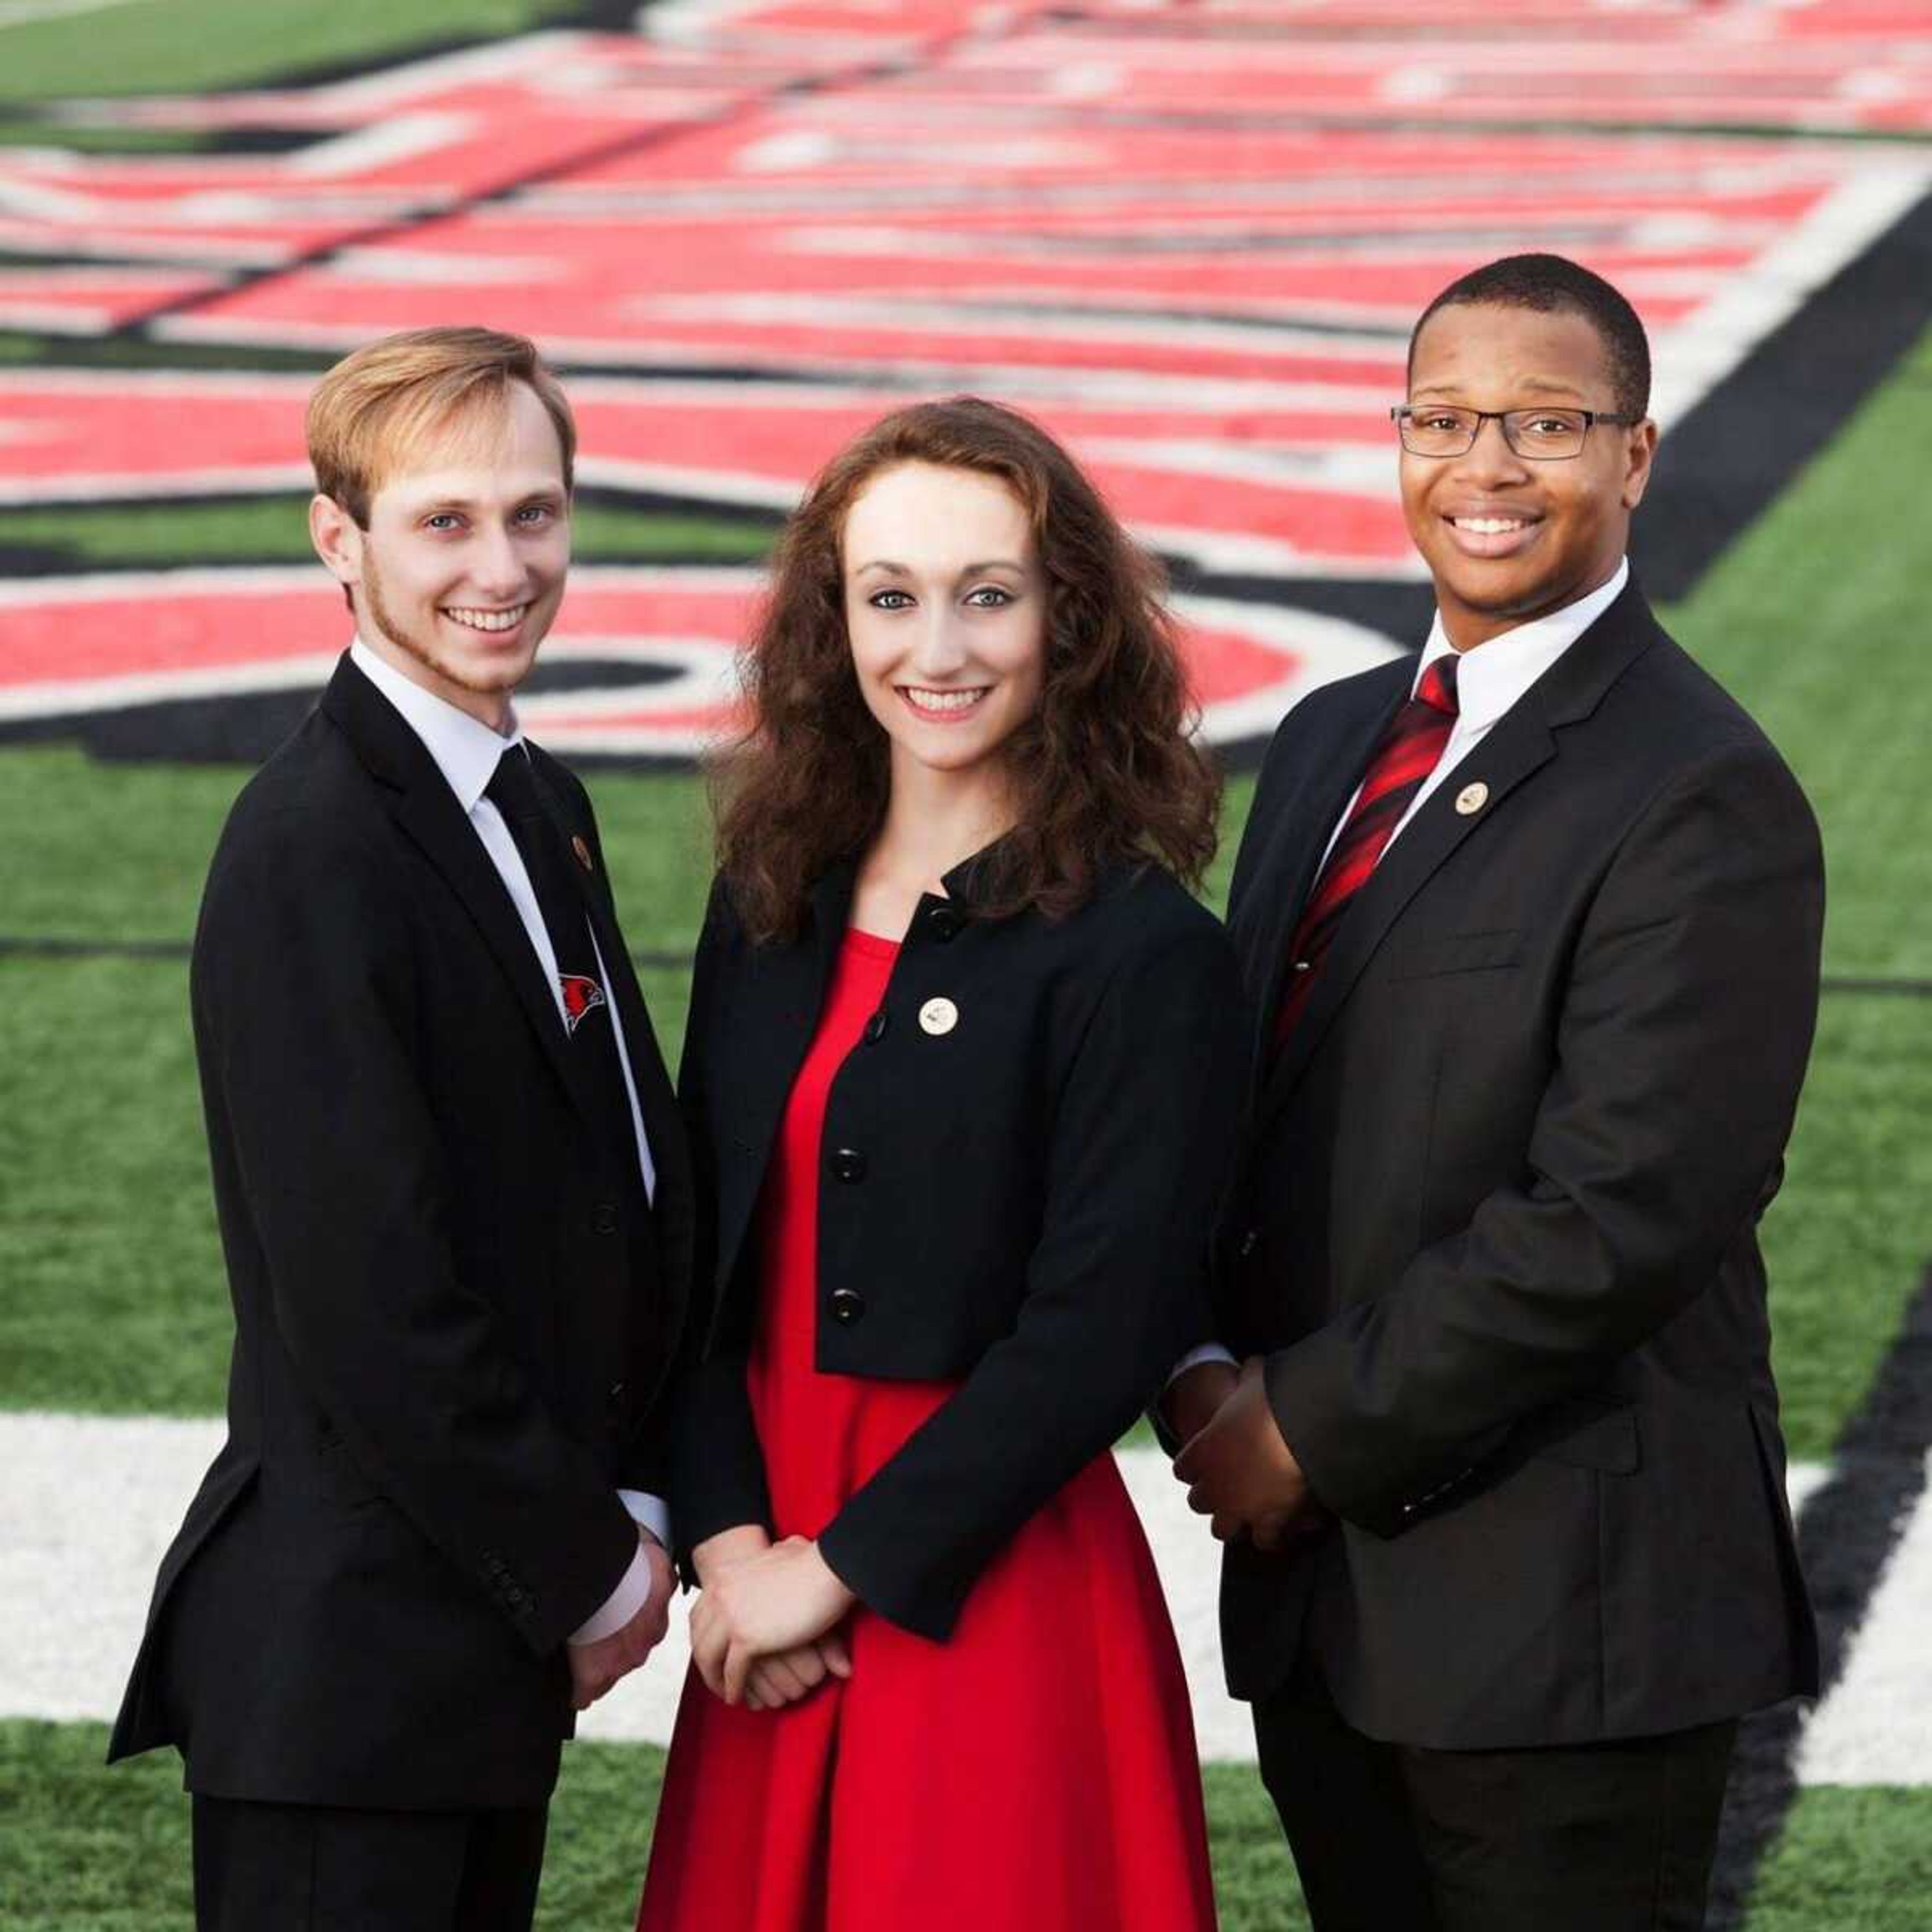 Mogley and Kennedy return to SGA for second term